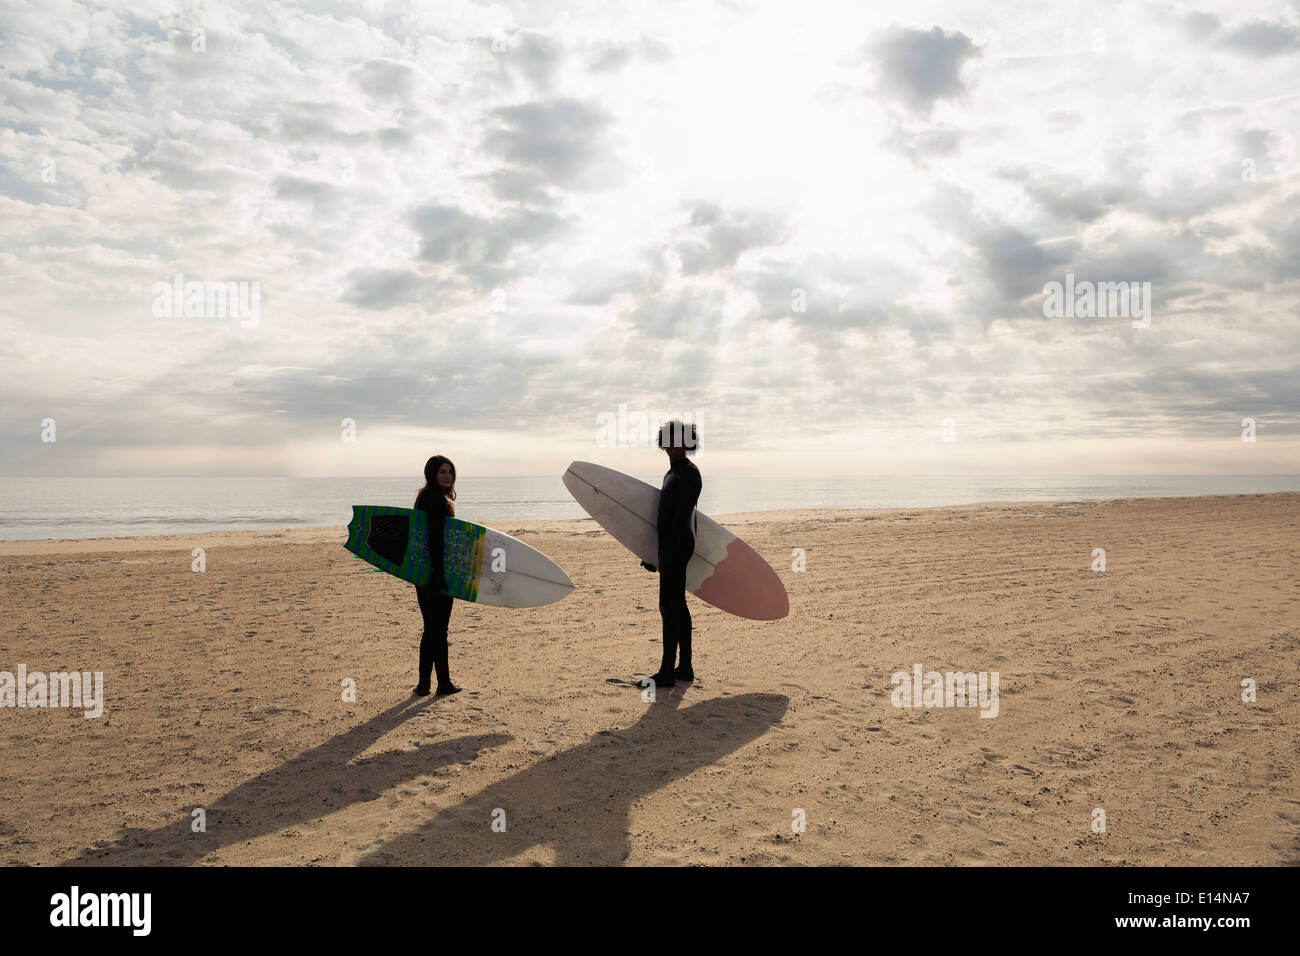 Surfers carrying boards on beach Banque D'Images